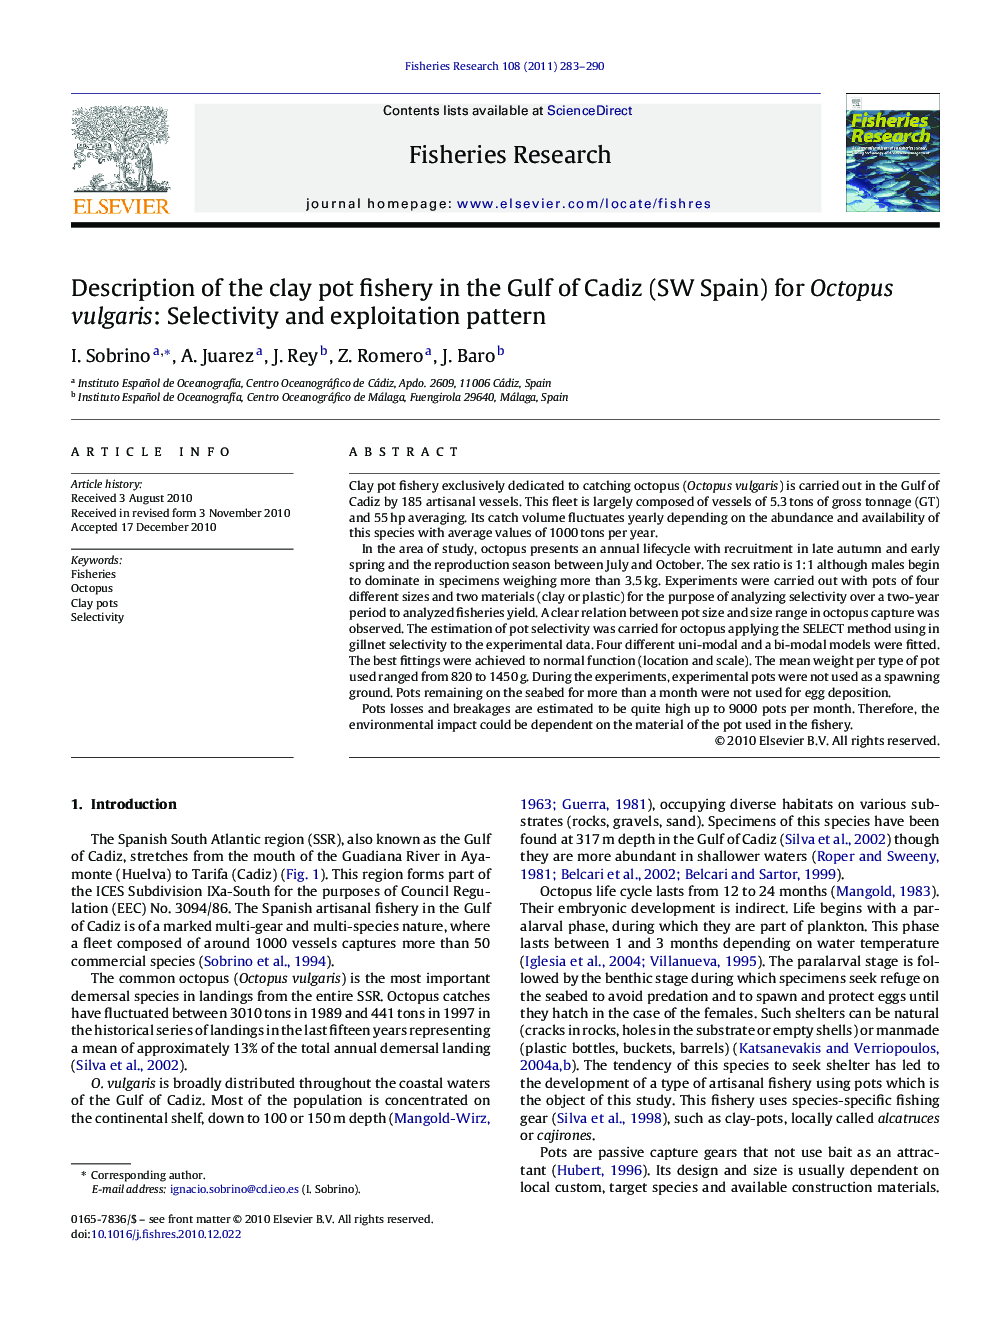 Description of the clay pot fishery in the Gulf of Cadiz (SW Spain) for Octopus vulgaris: Selectivity and exploitation pattern